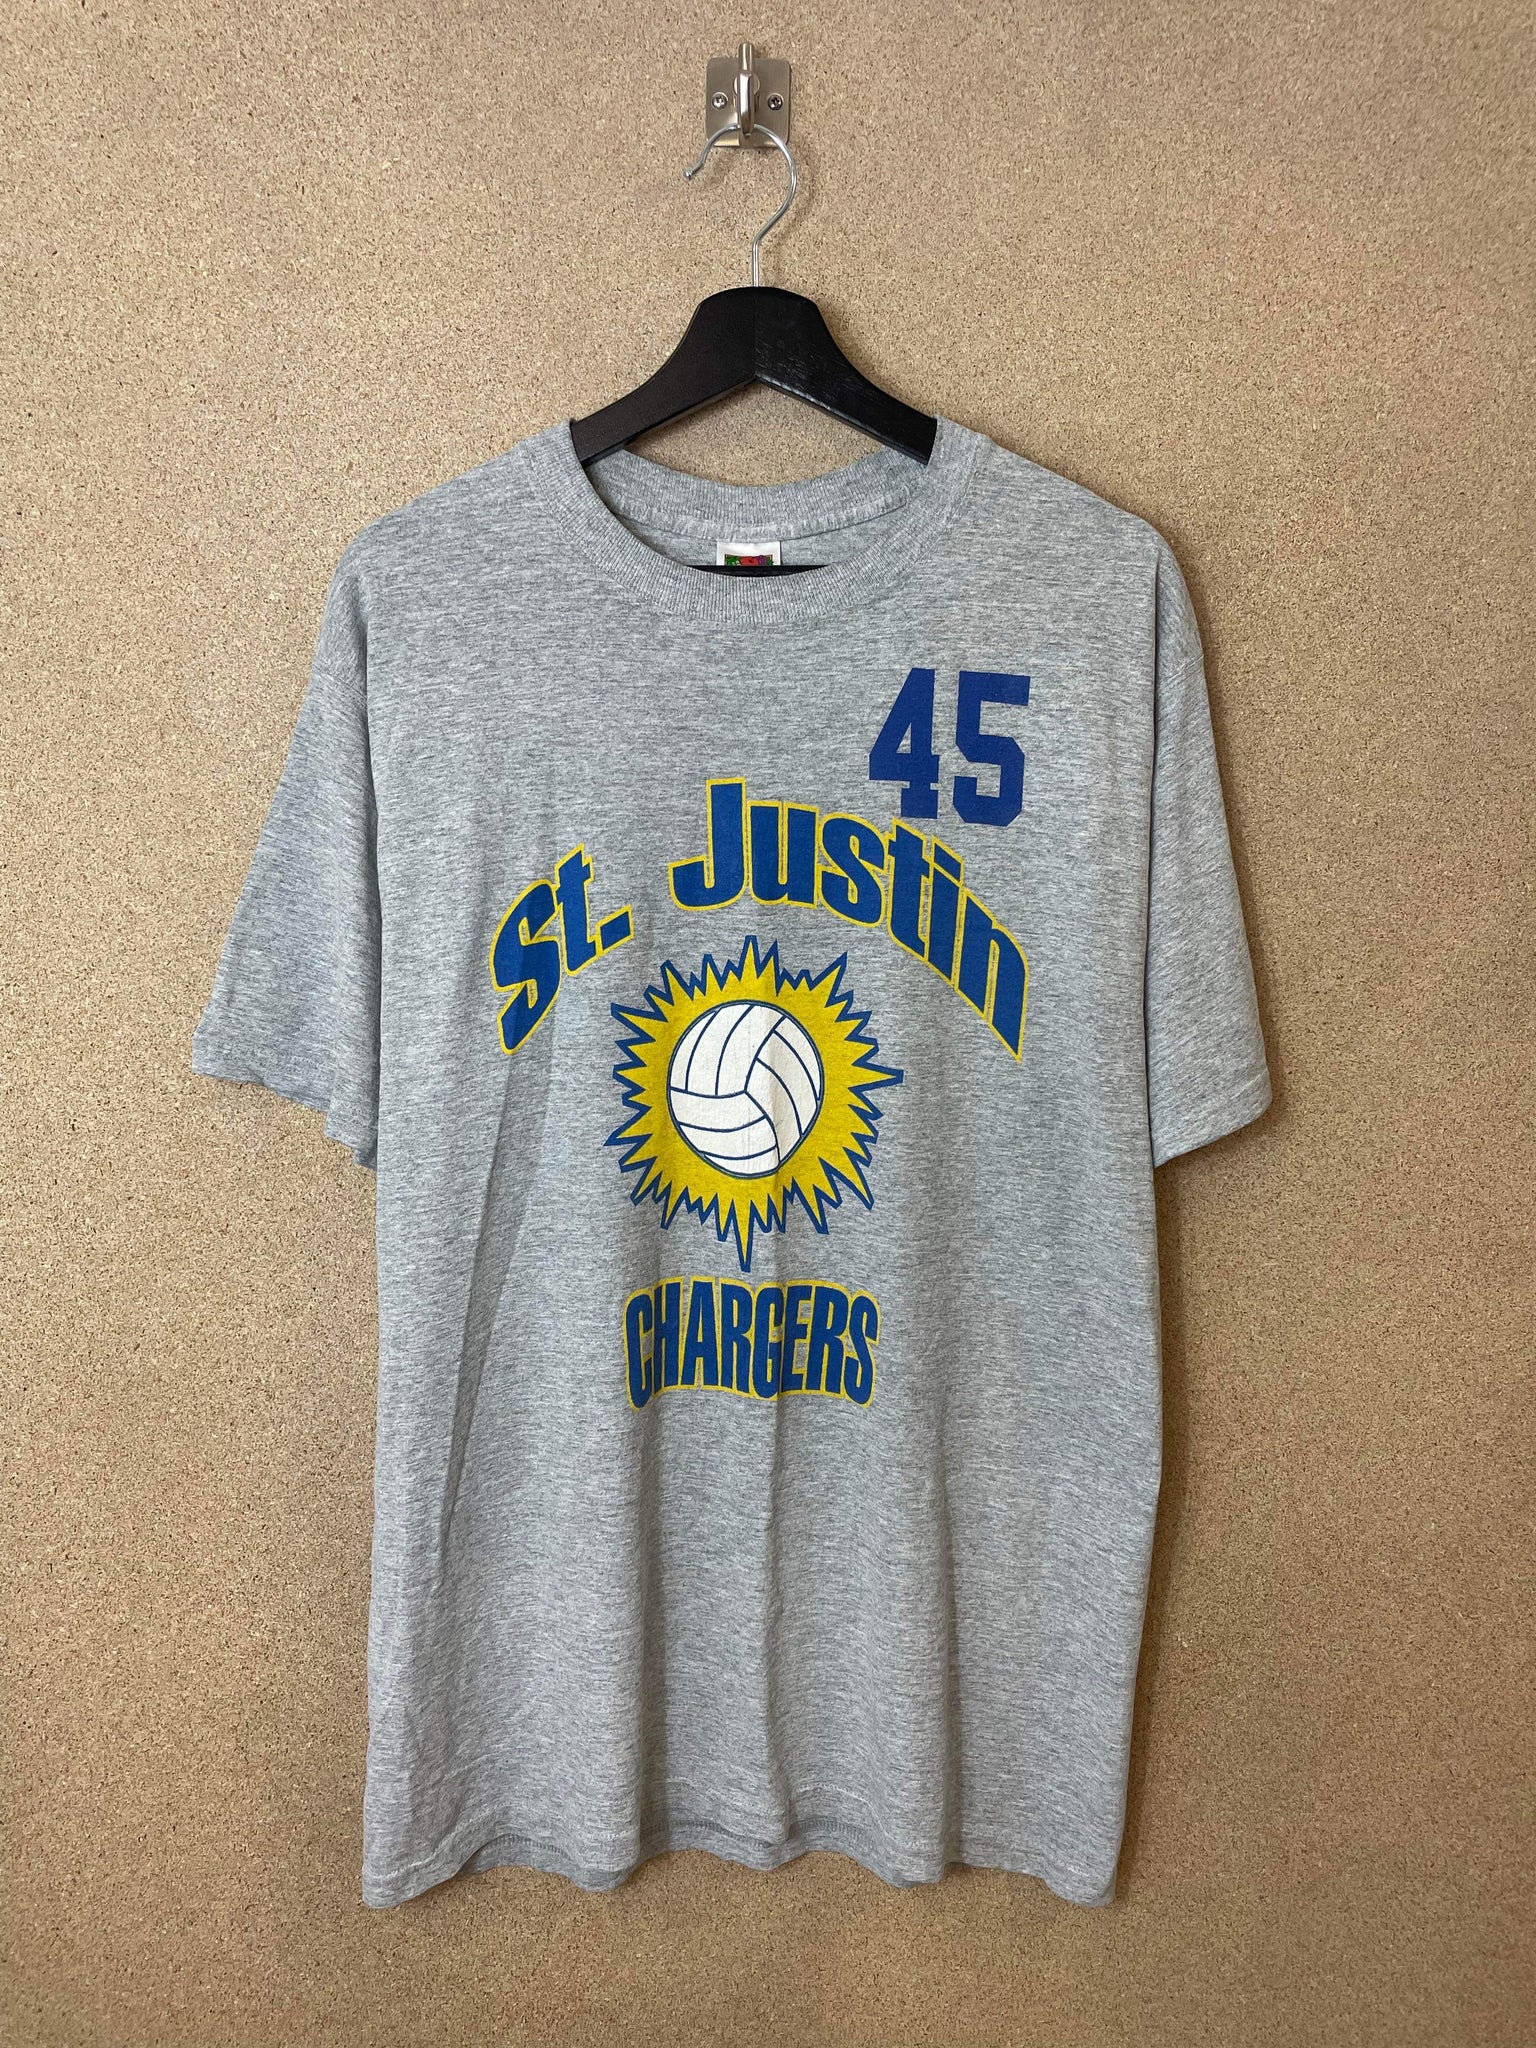 Vintage St. Justin Chargers 90s Tee - L